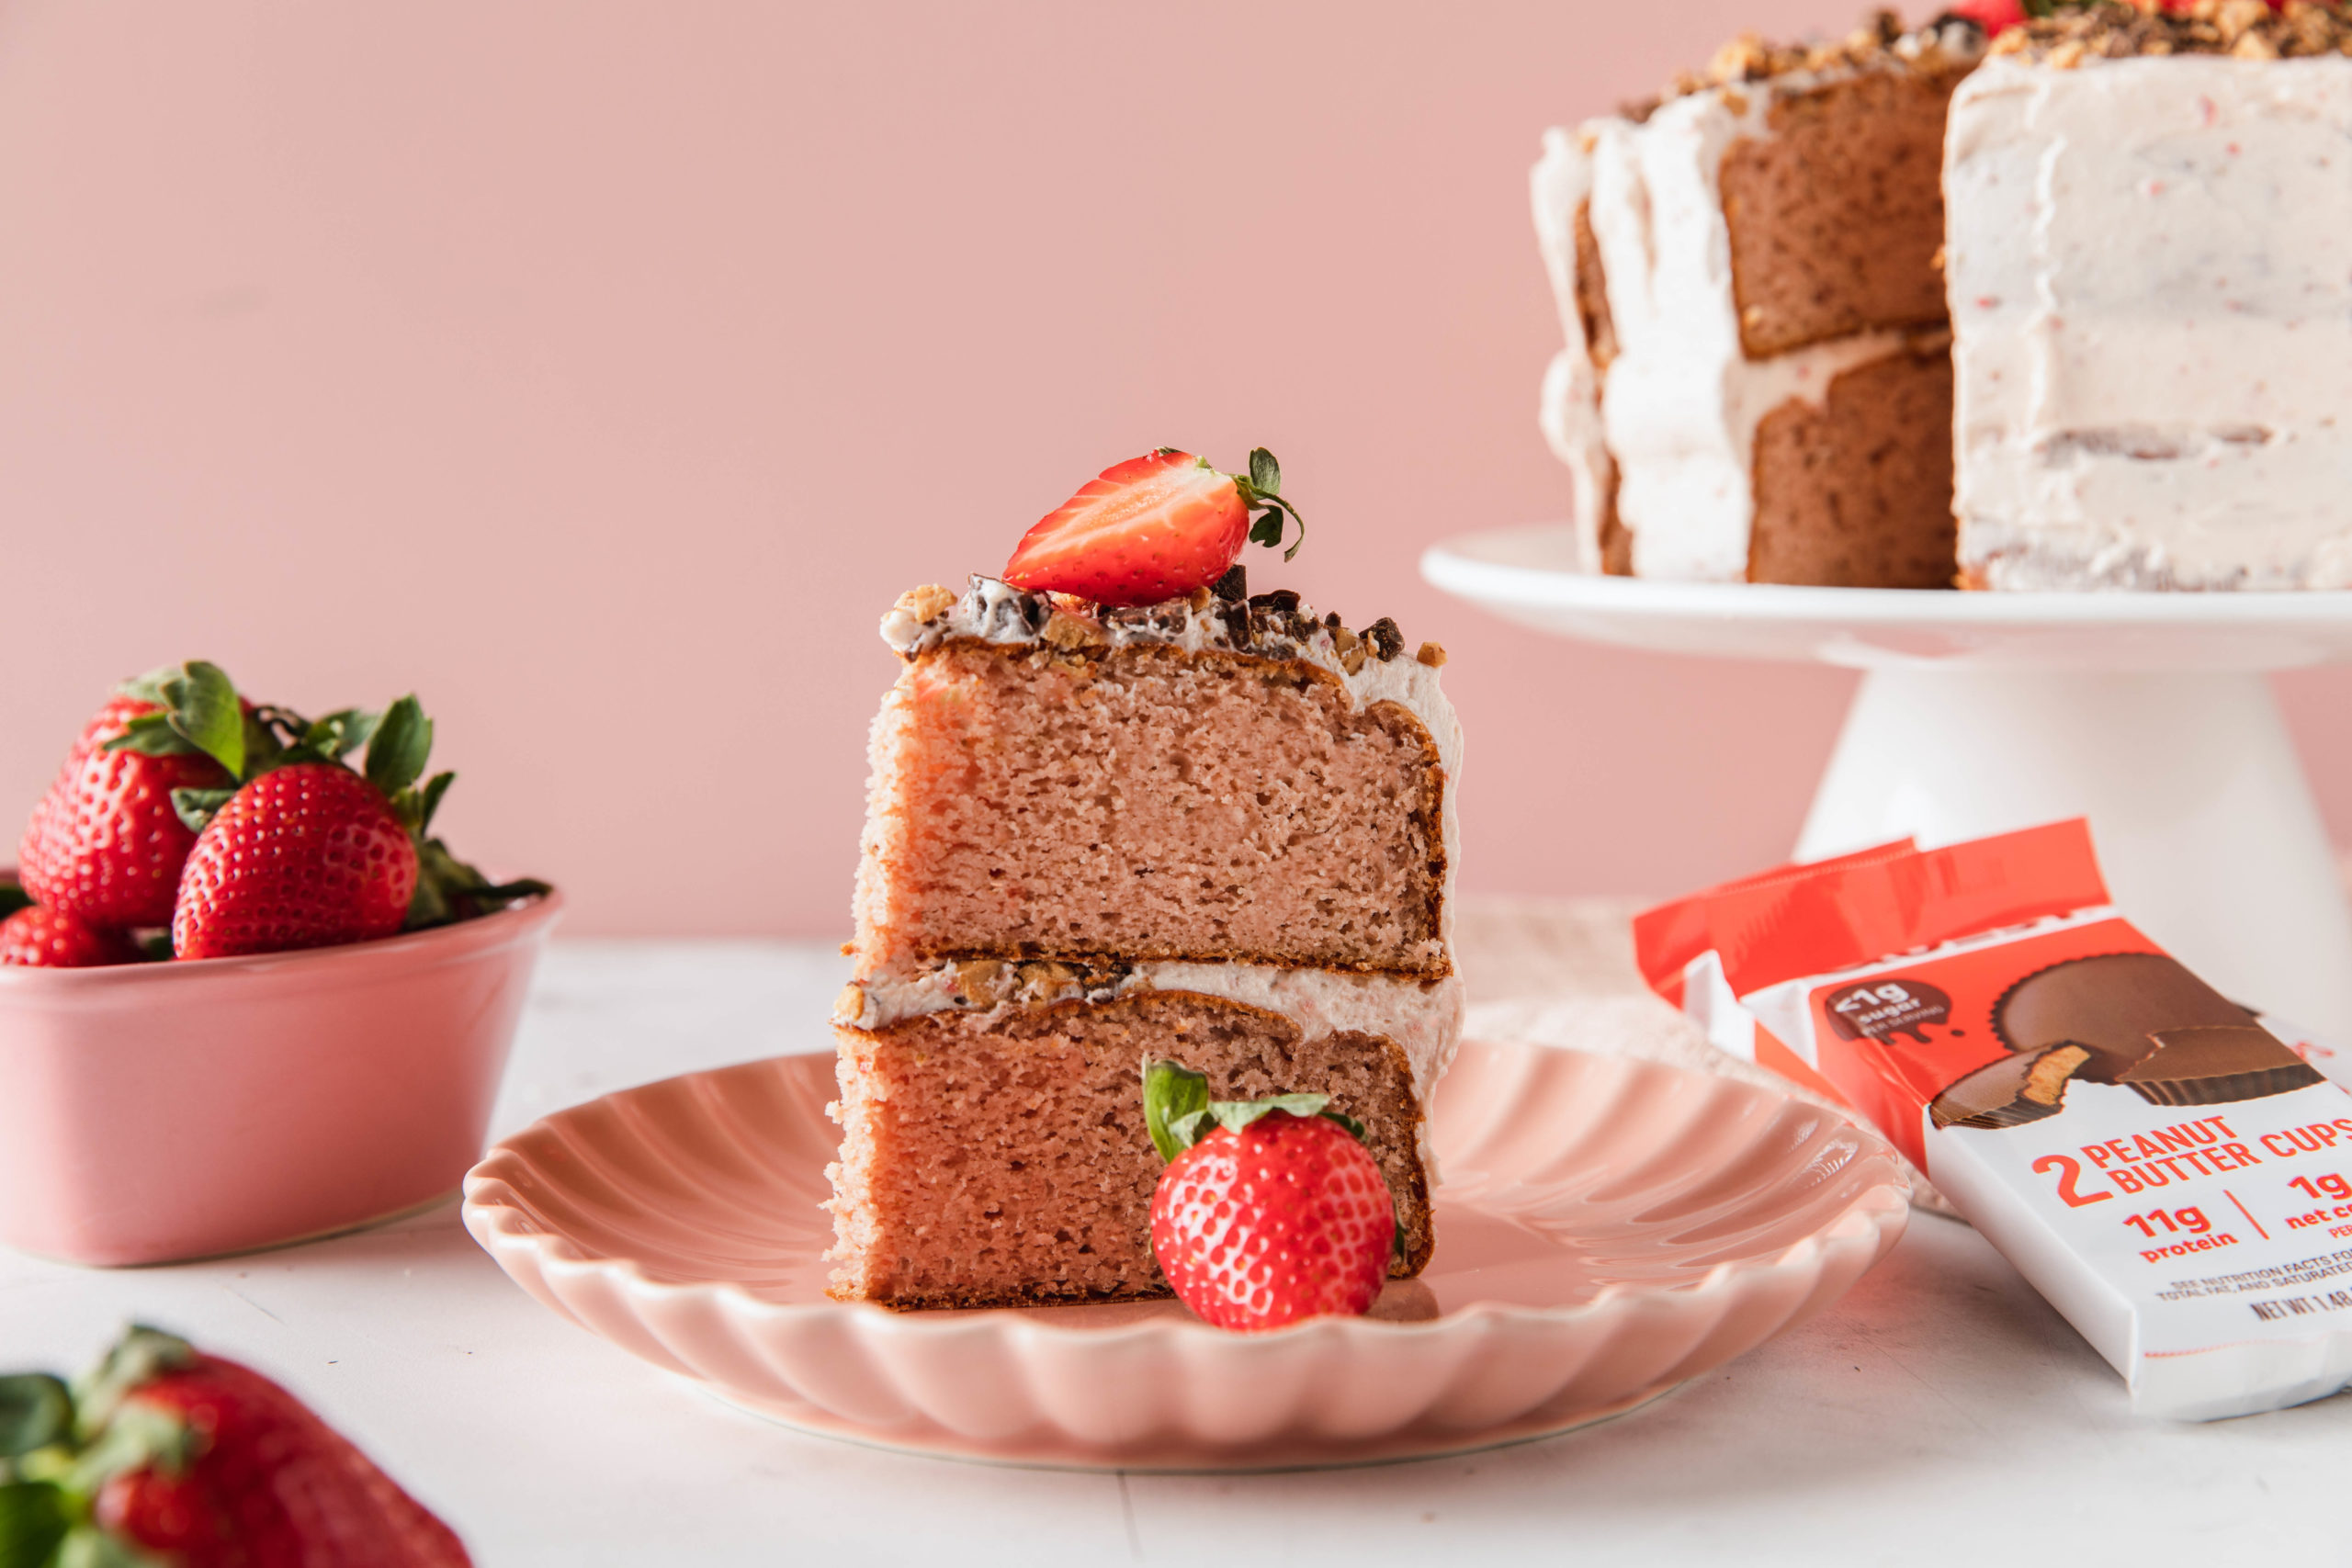 W2-Strawberry-PB-Cup-Cake-Web-FULL-RES-1